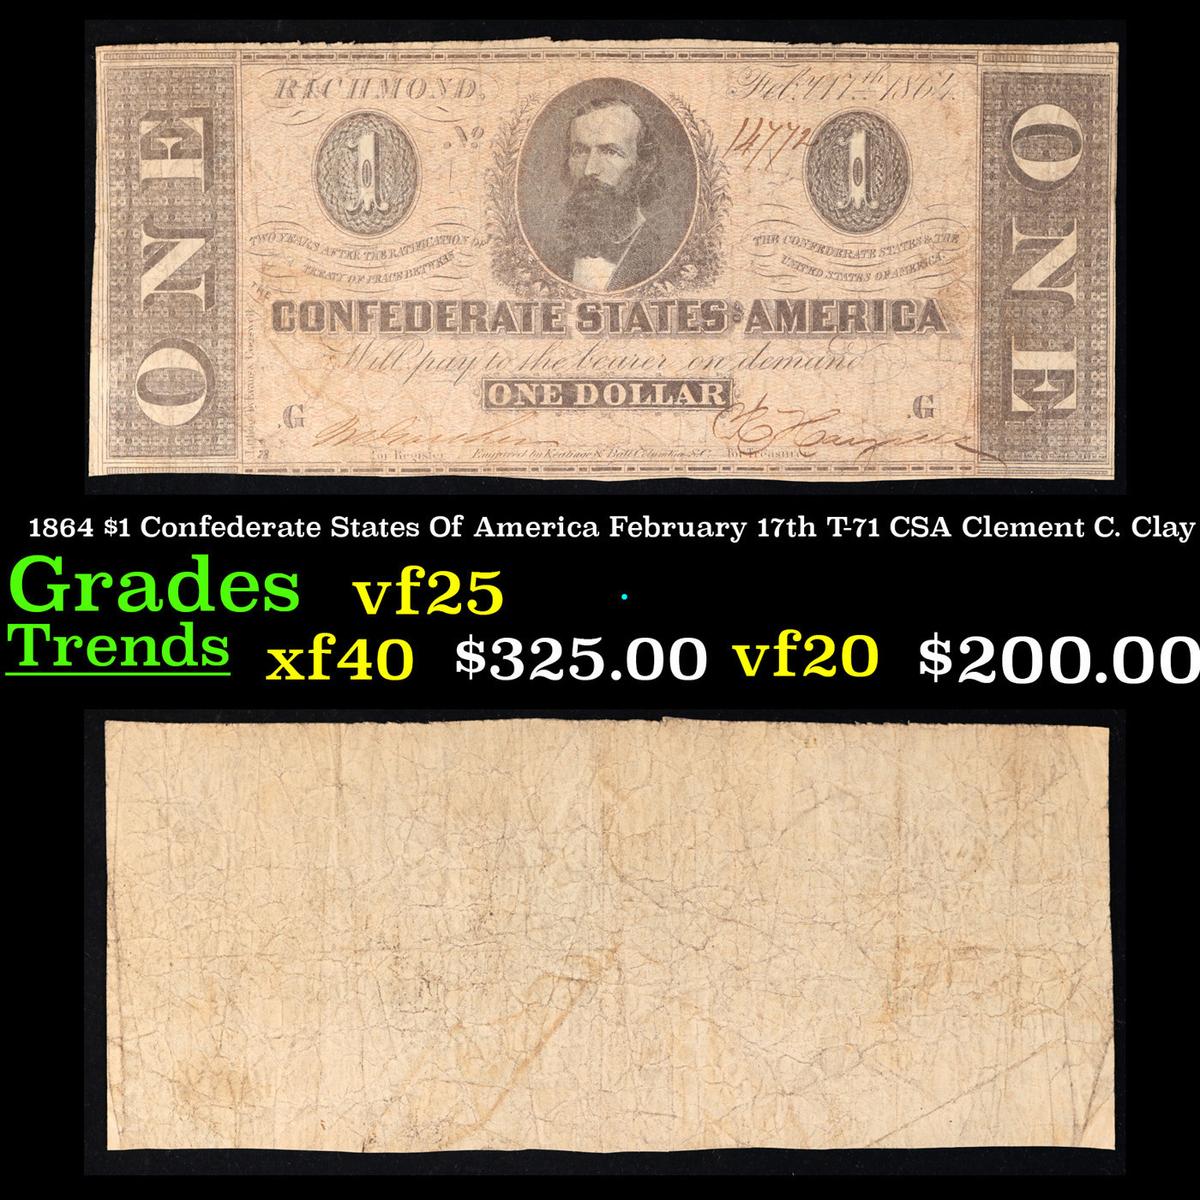 1864 $1 Confederate States Of America February 17th T-71 CSA Clement C. Clay Grades vf+